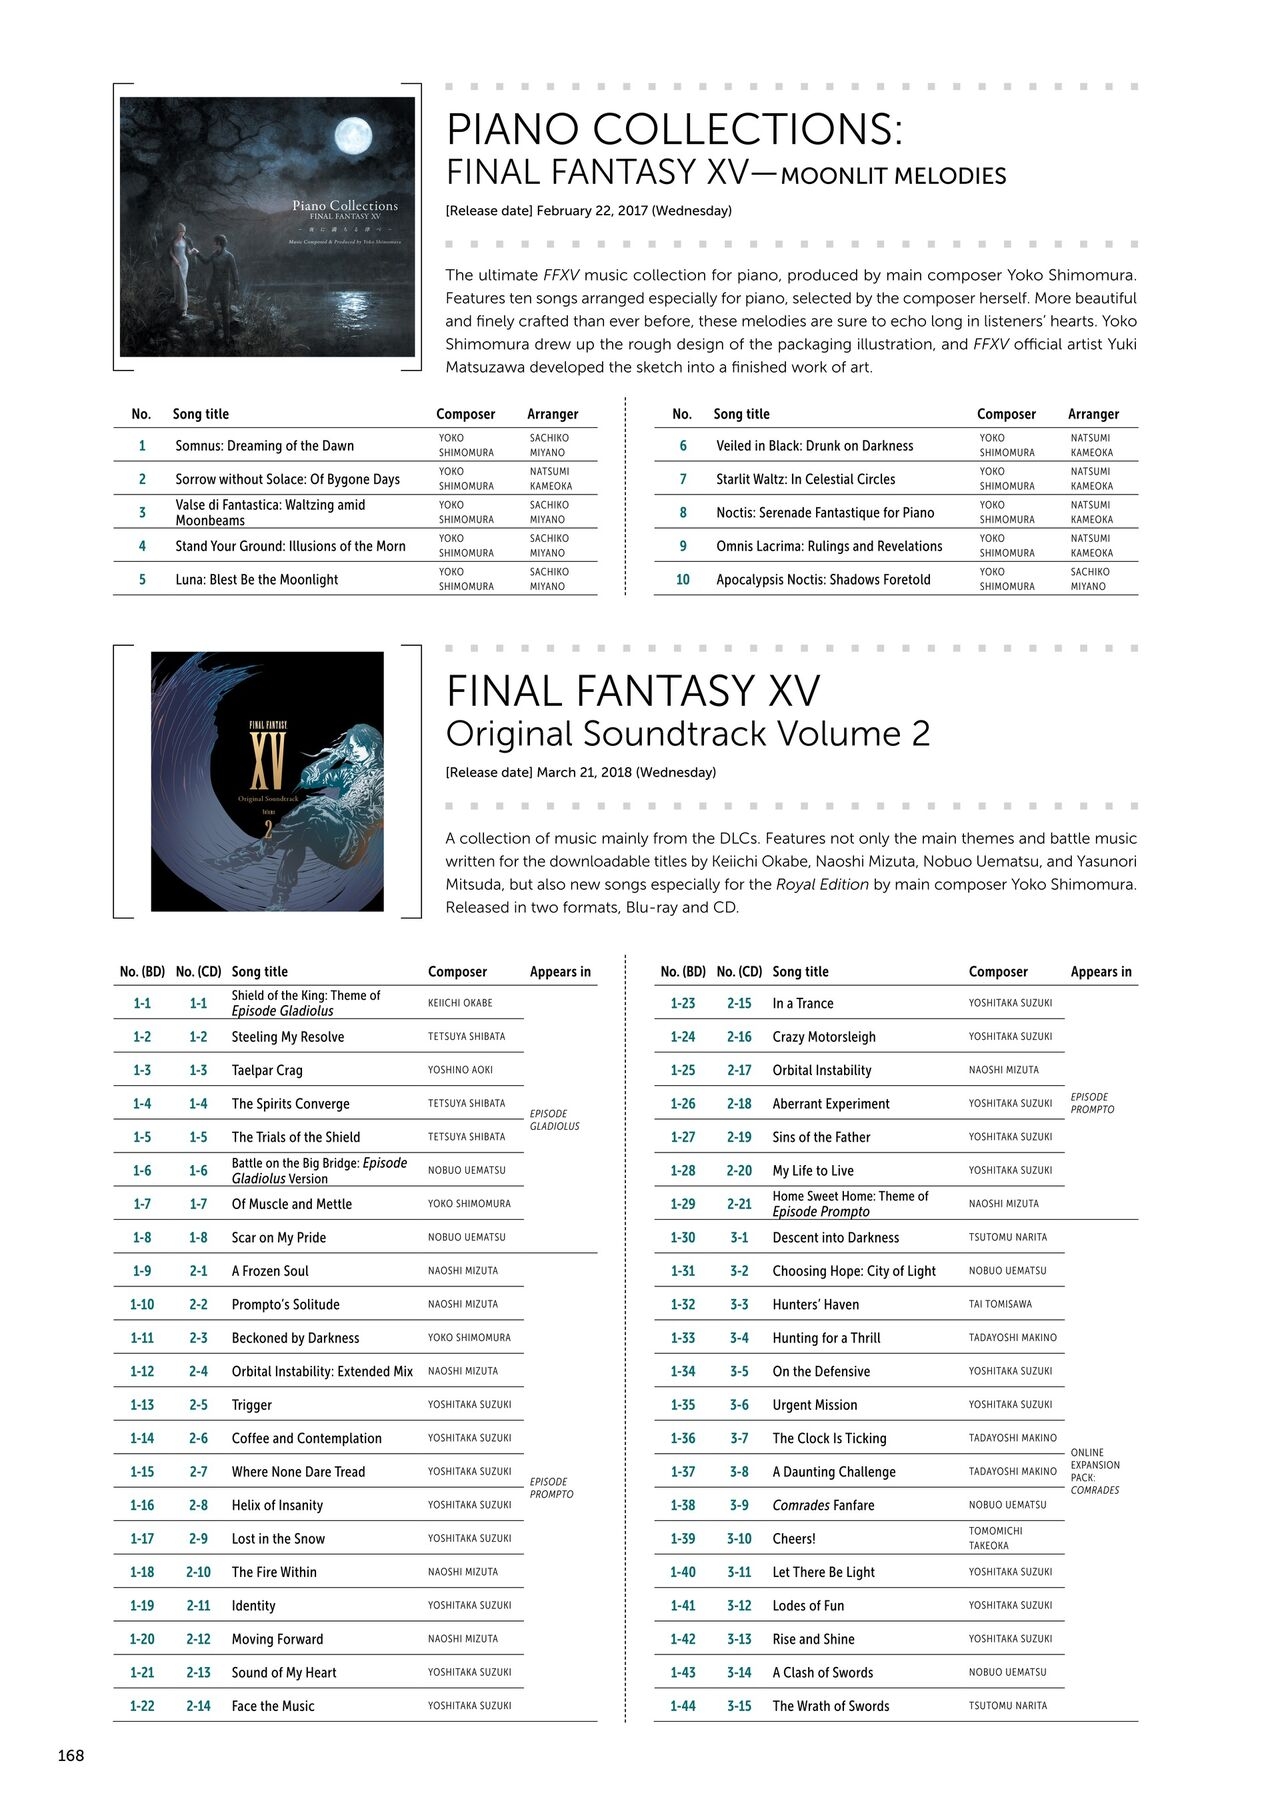 Final Fantasy XV Official Works 142